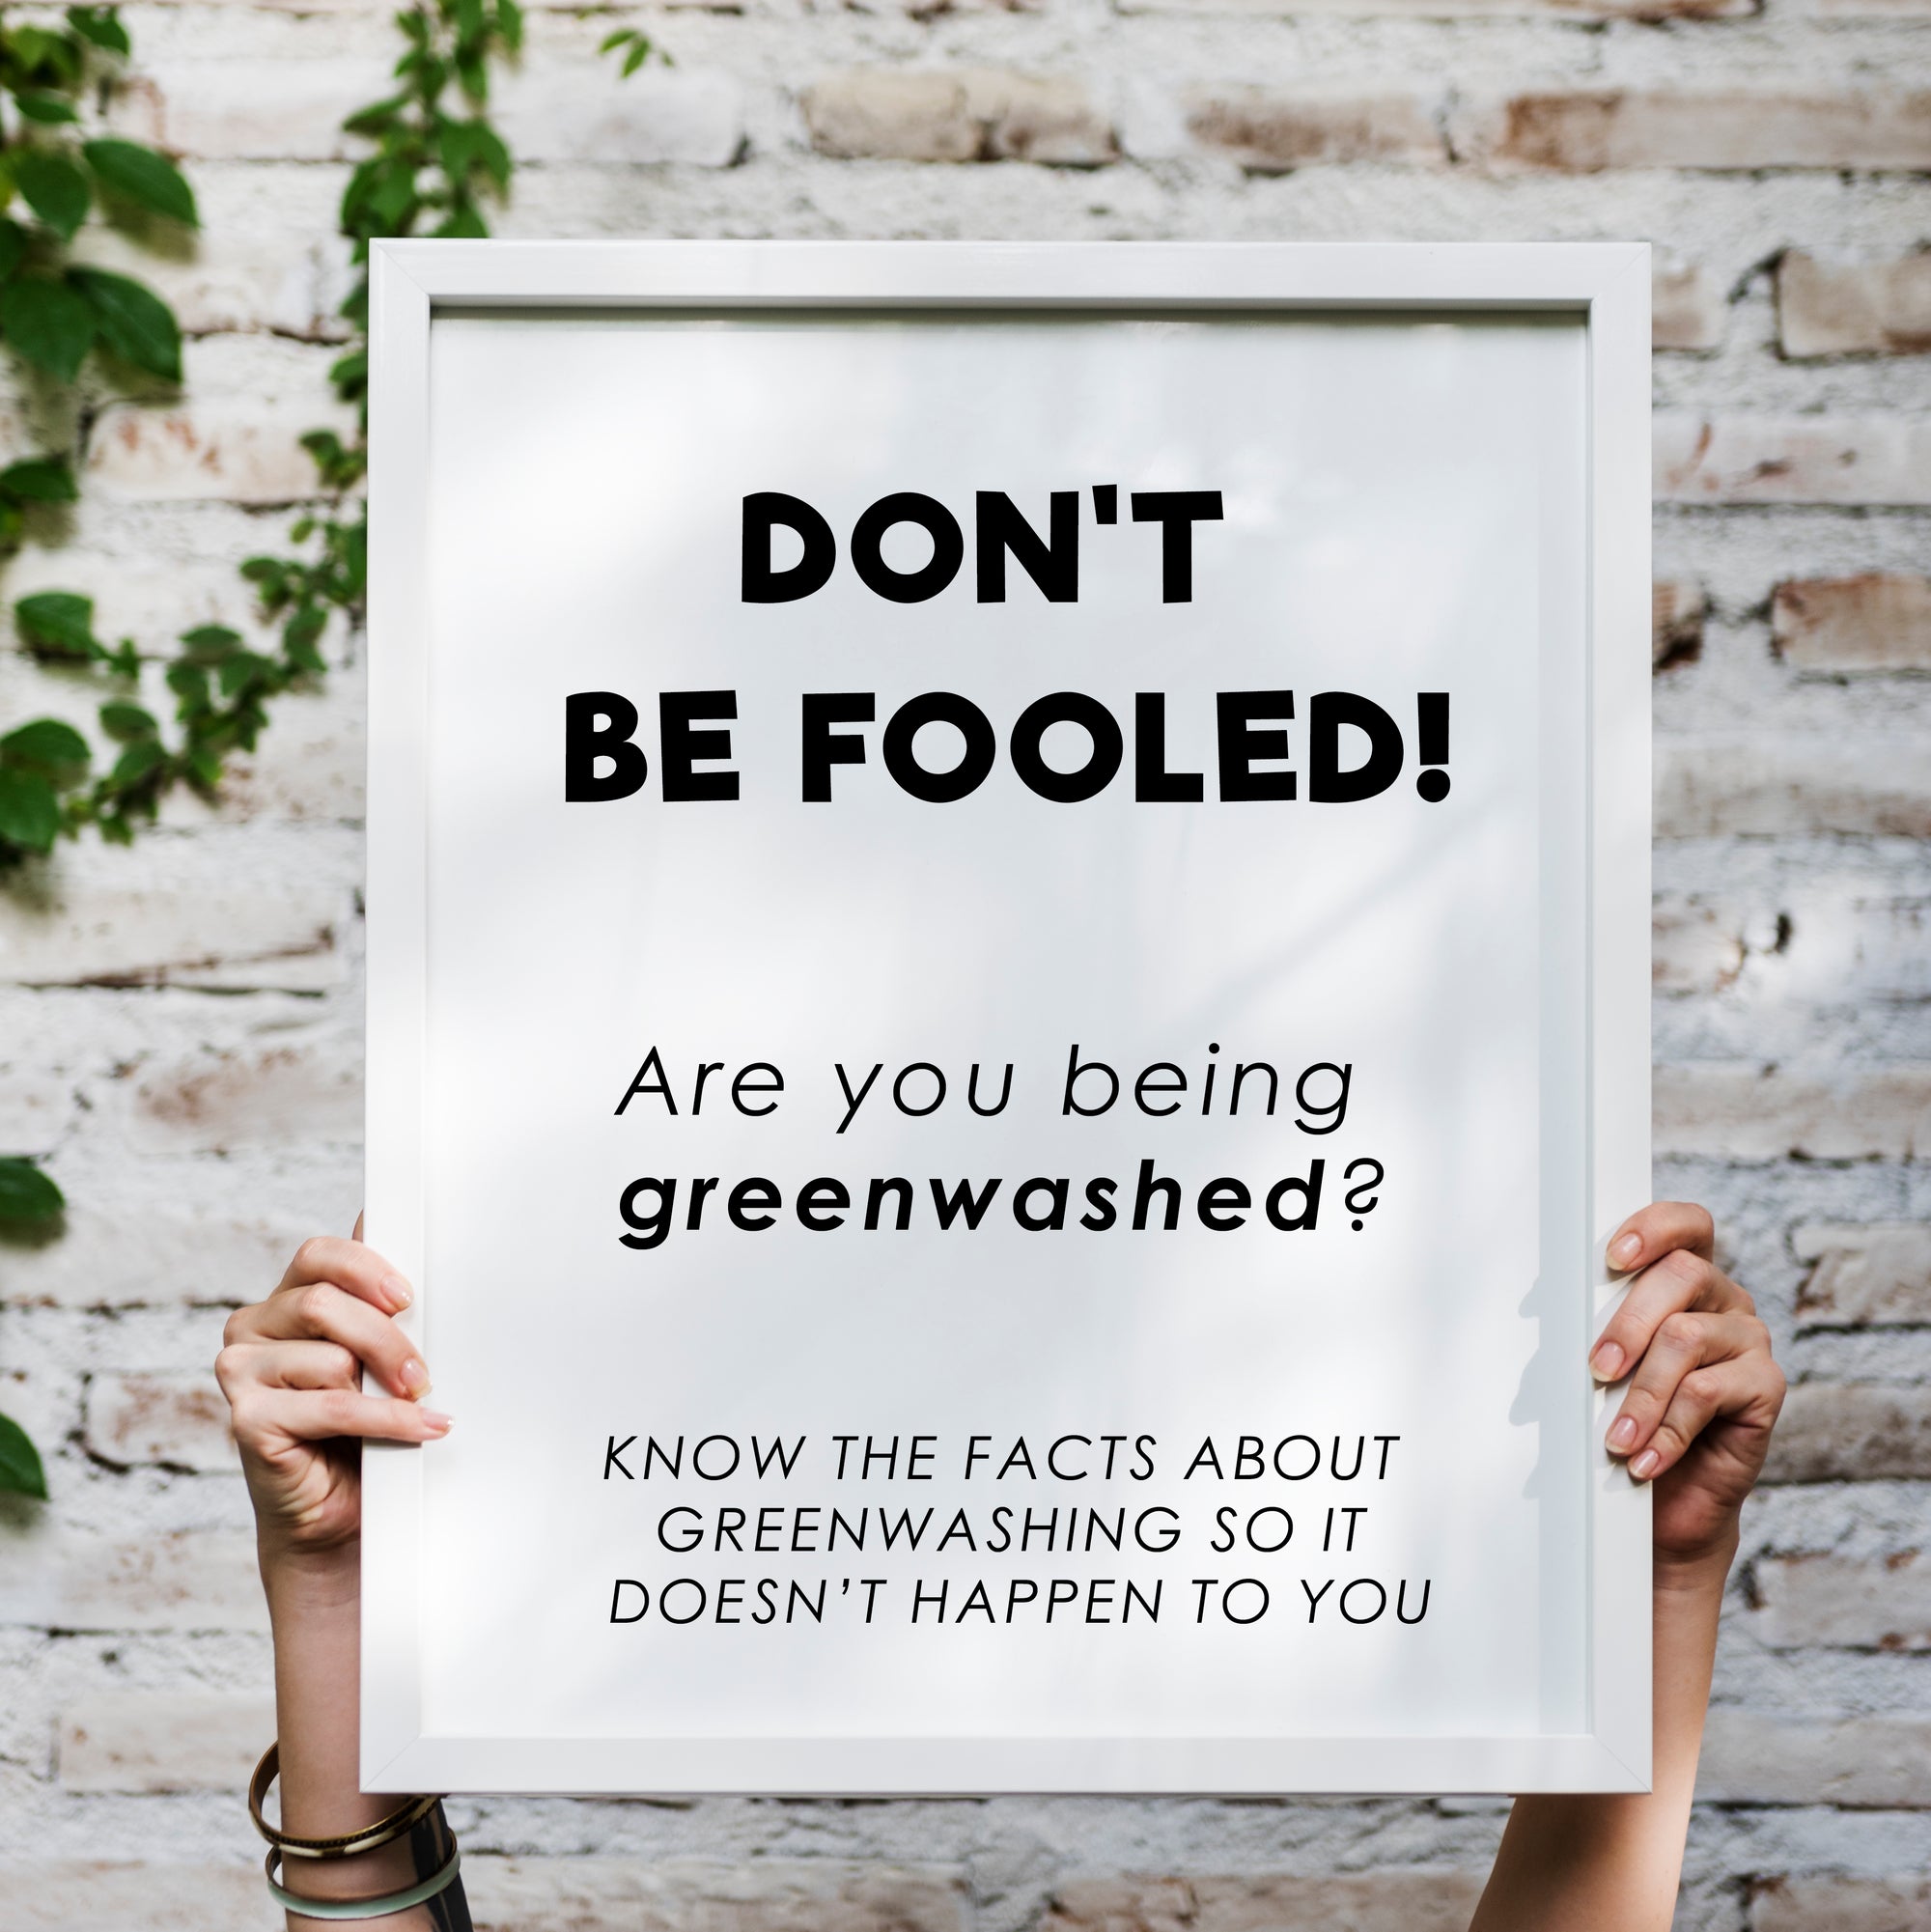 Green Washing: What is it and how do I avoid it?